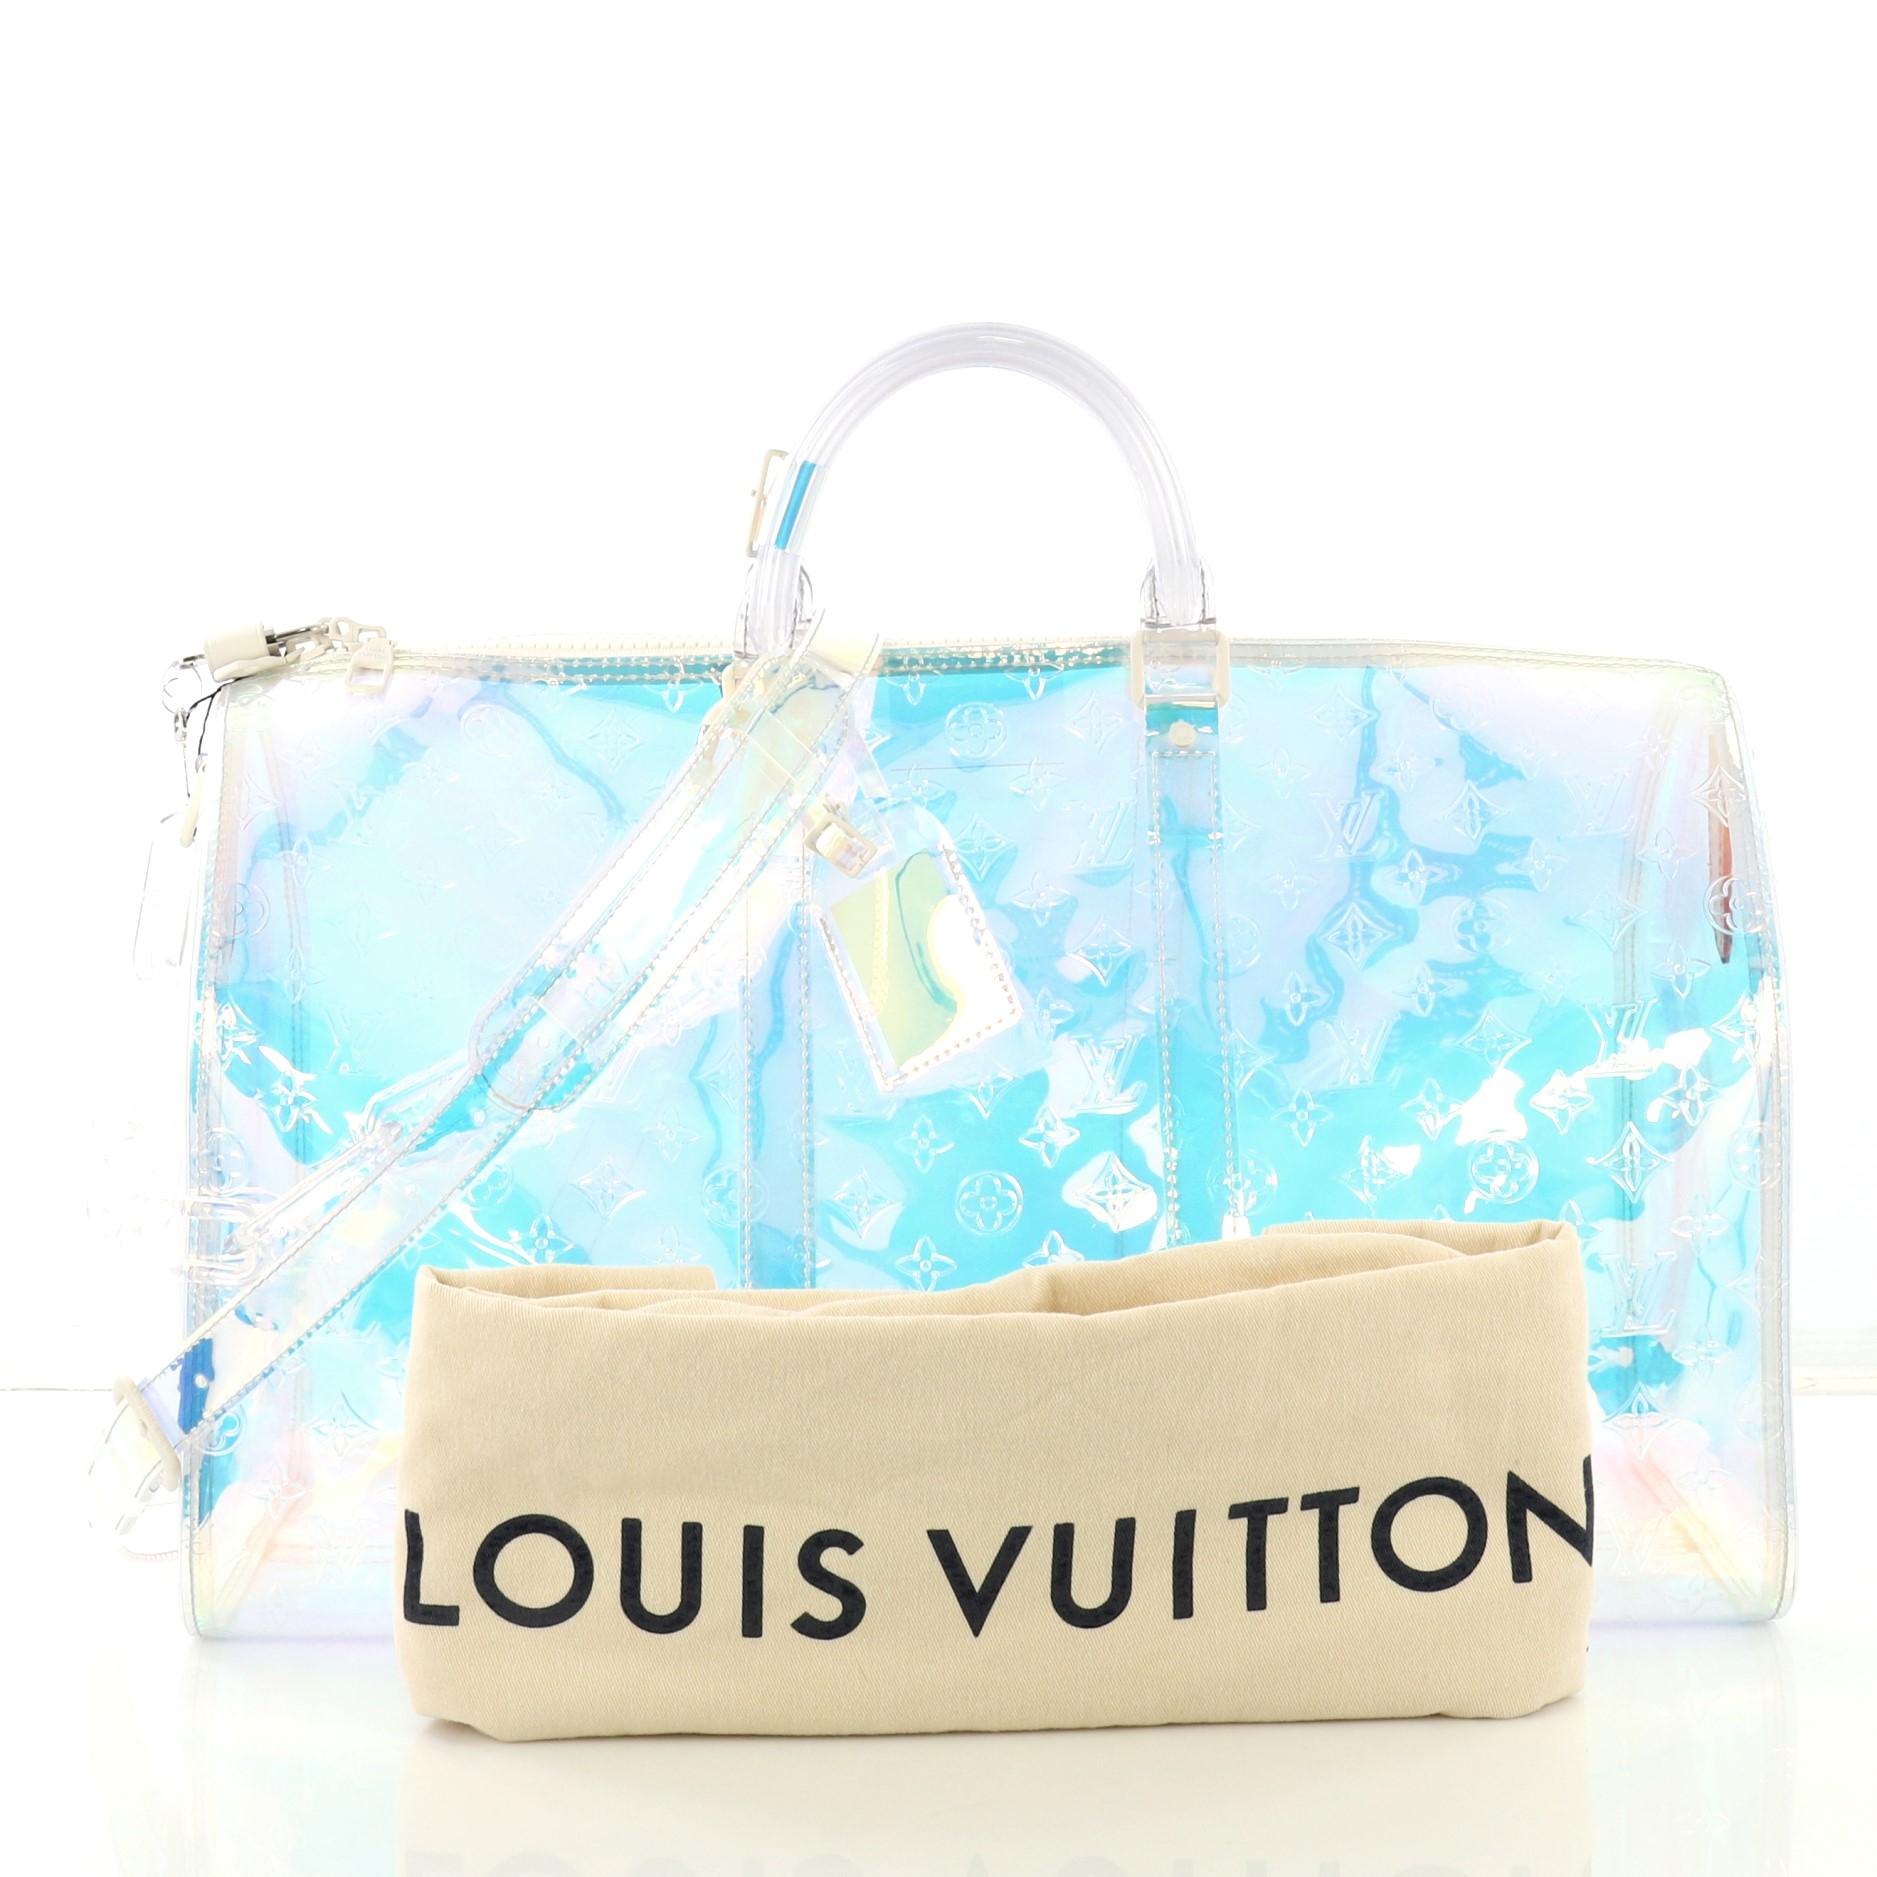 This Louis Vuitton Keepall Bandouliere Bag Limited Edition Monogram Prism PVC 50, crafted in multicolor iridescent monogram prism PVC, features dual rolled handles, resin chain, and silver-tone hardware. Its zip closure opens to a multicolor